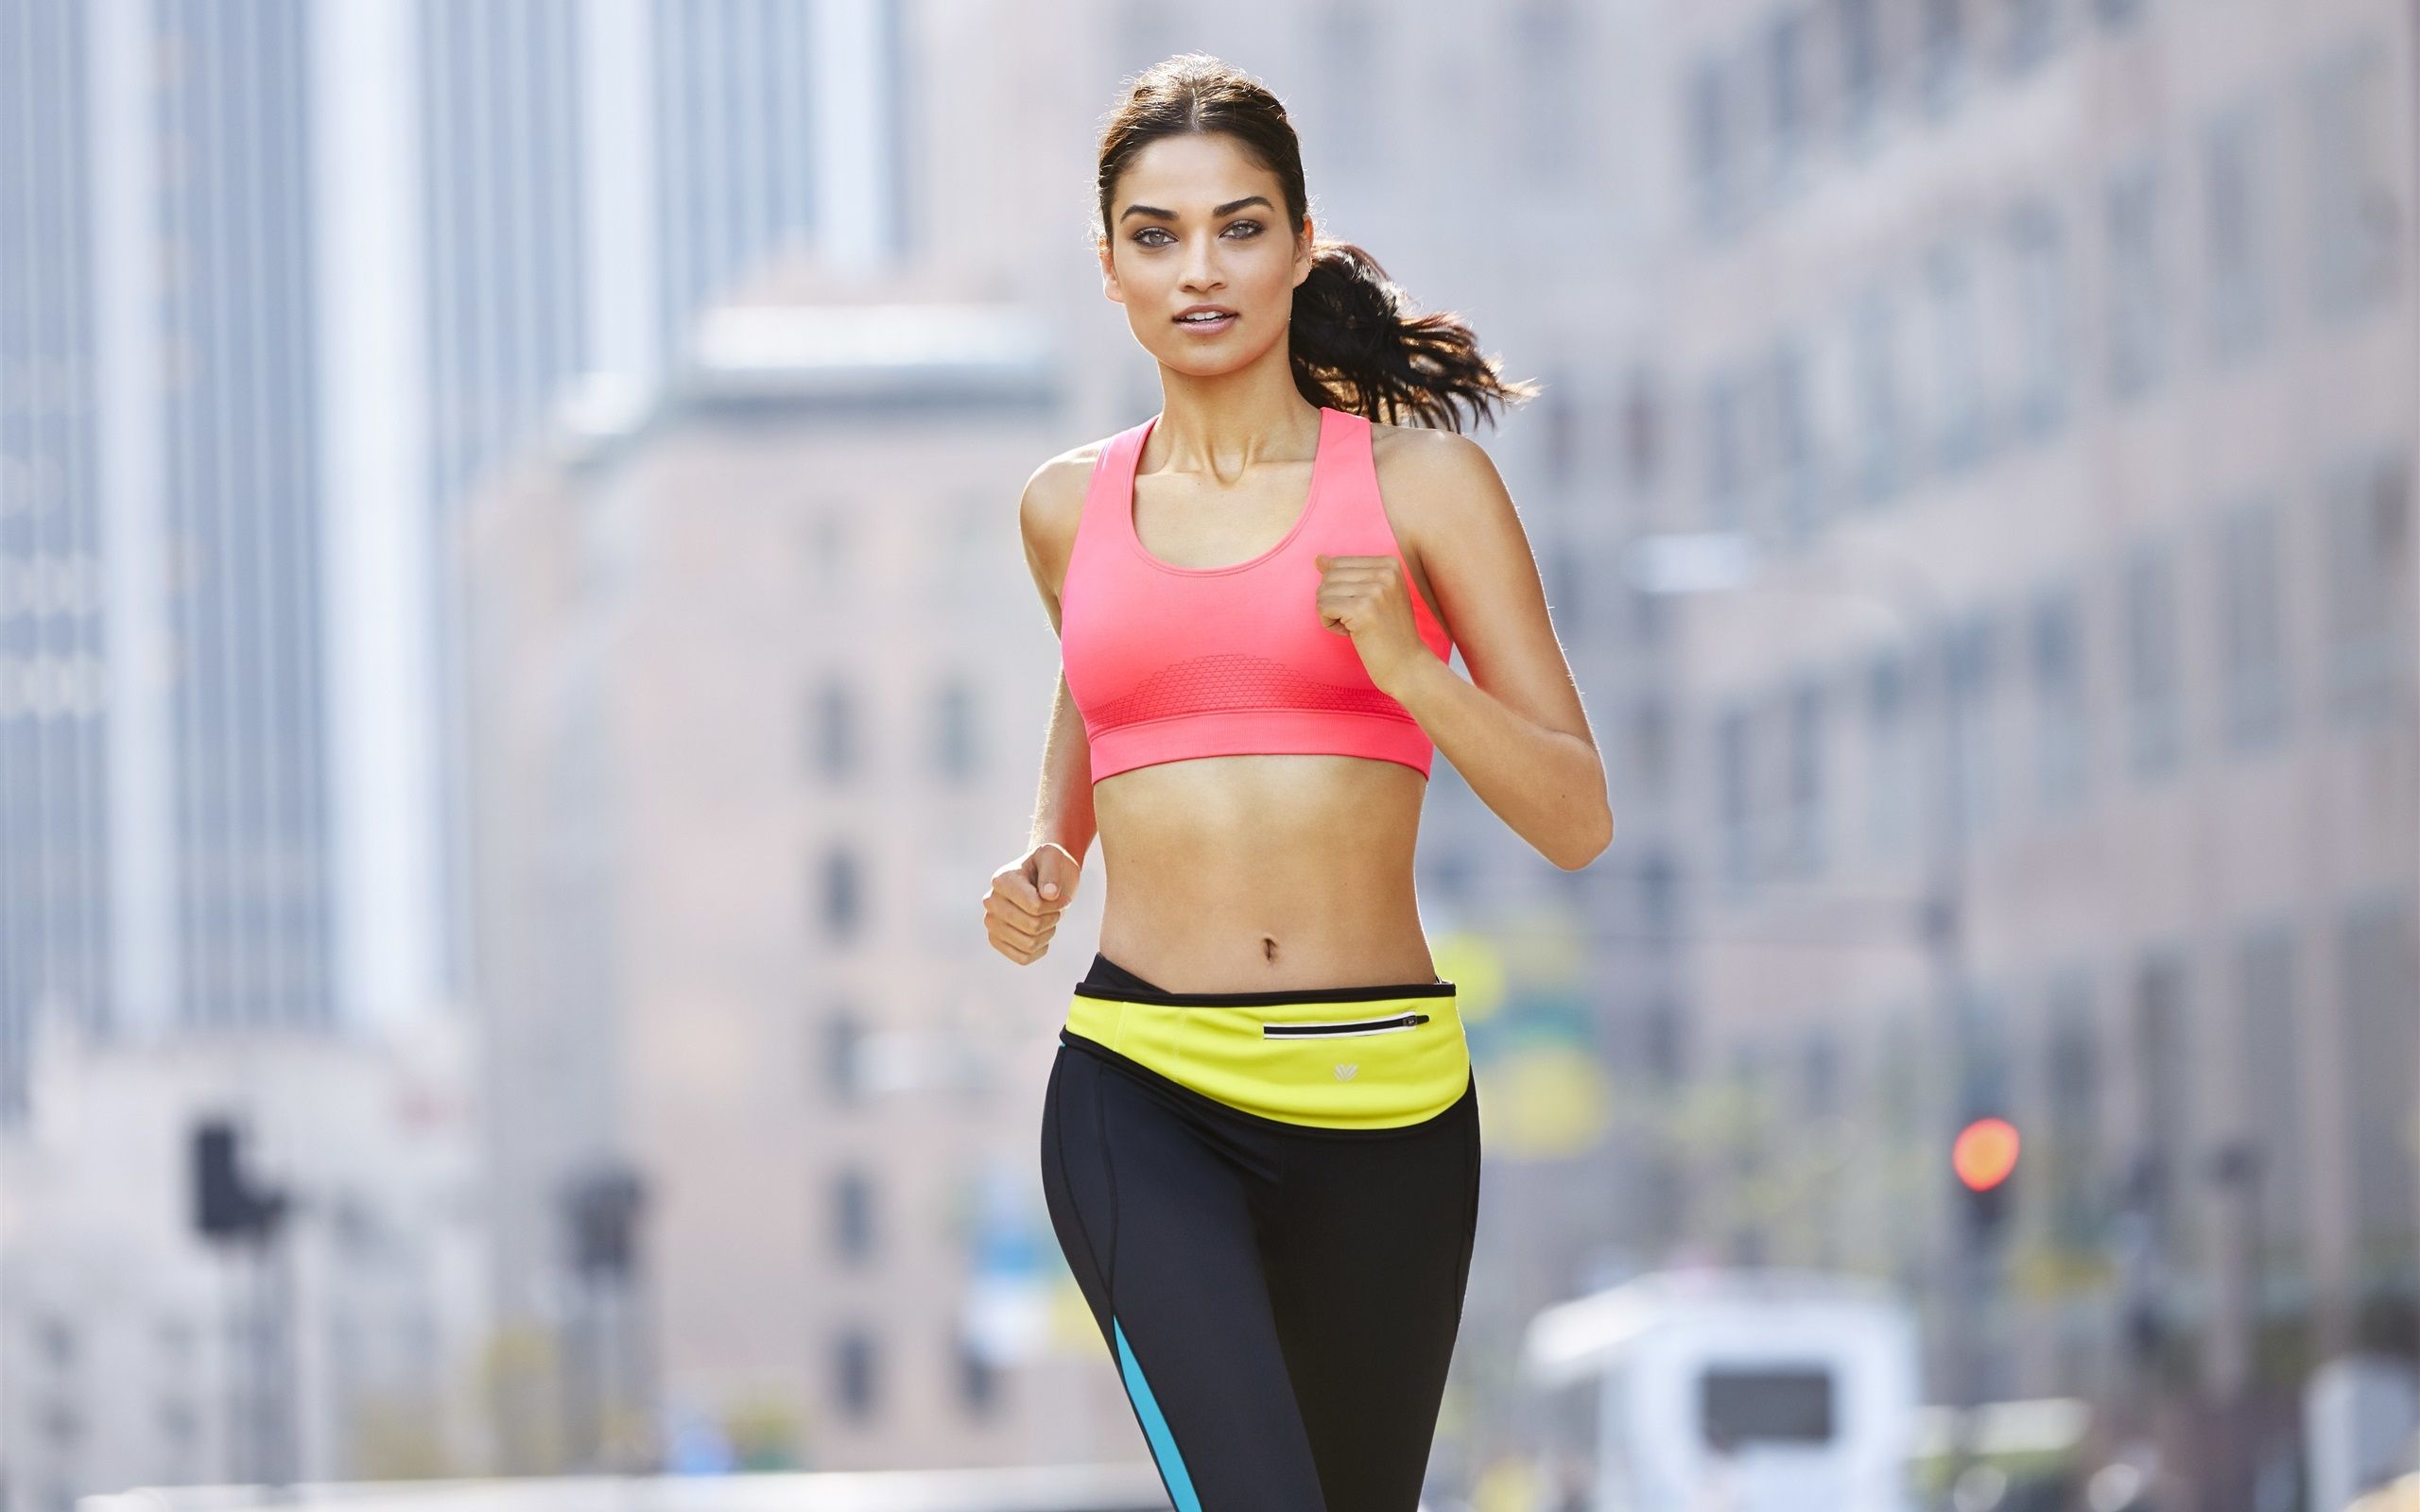 Wallpaper Fitness girl, running, sportswear, city 2560x1600 HD Picture, Image